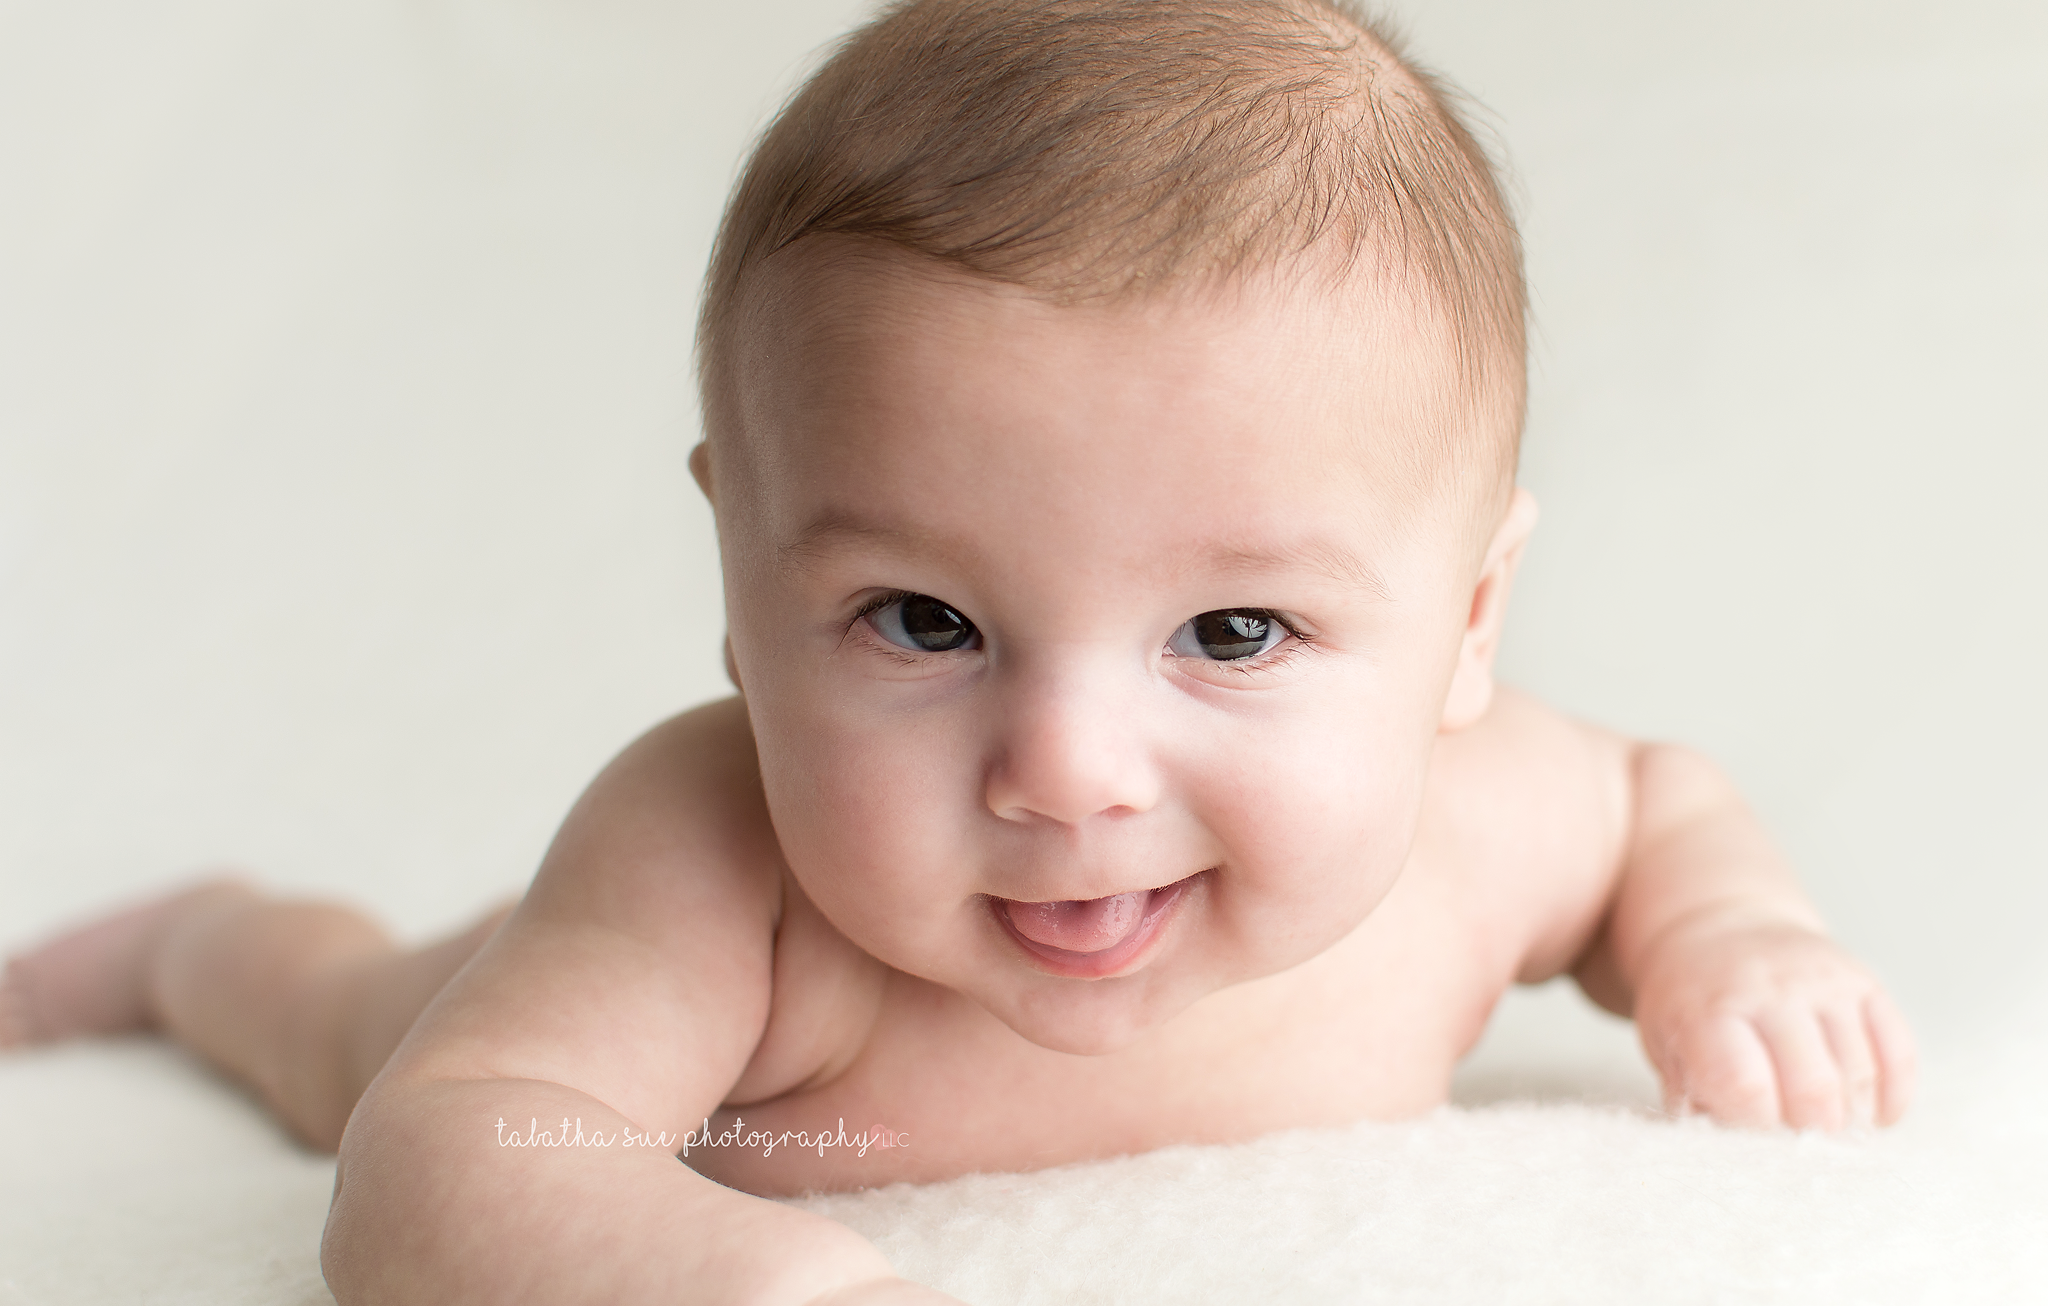 simple-minimal-baby-photographer-parma-ohio-44134-baby-boy-3-month-session.png